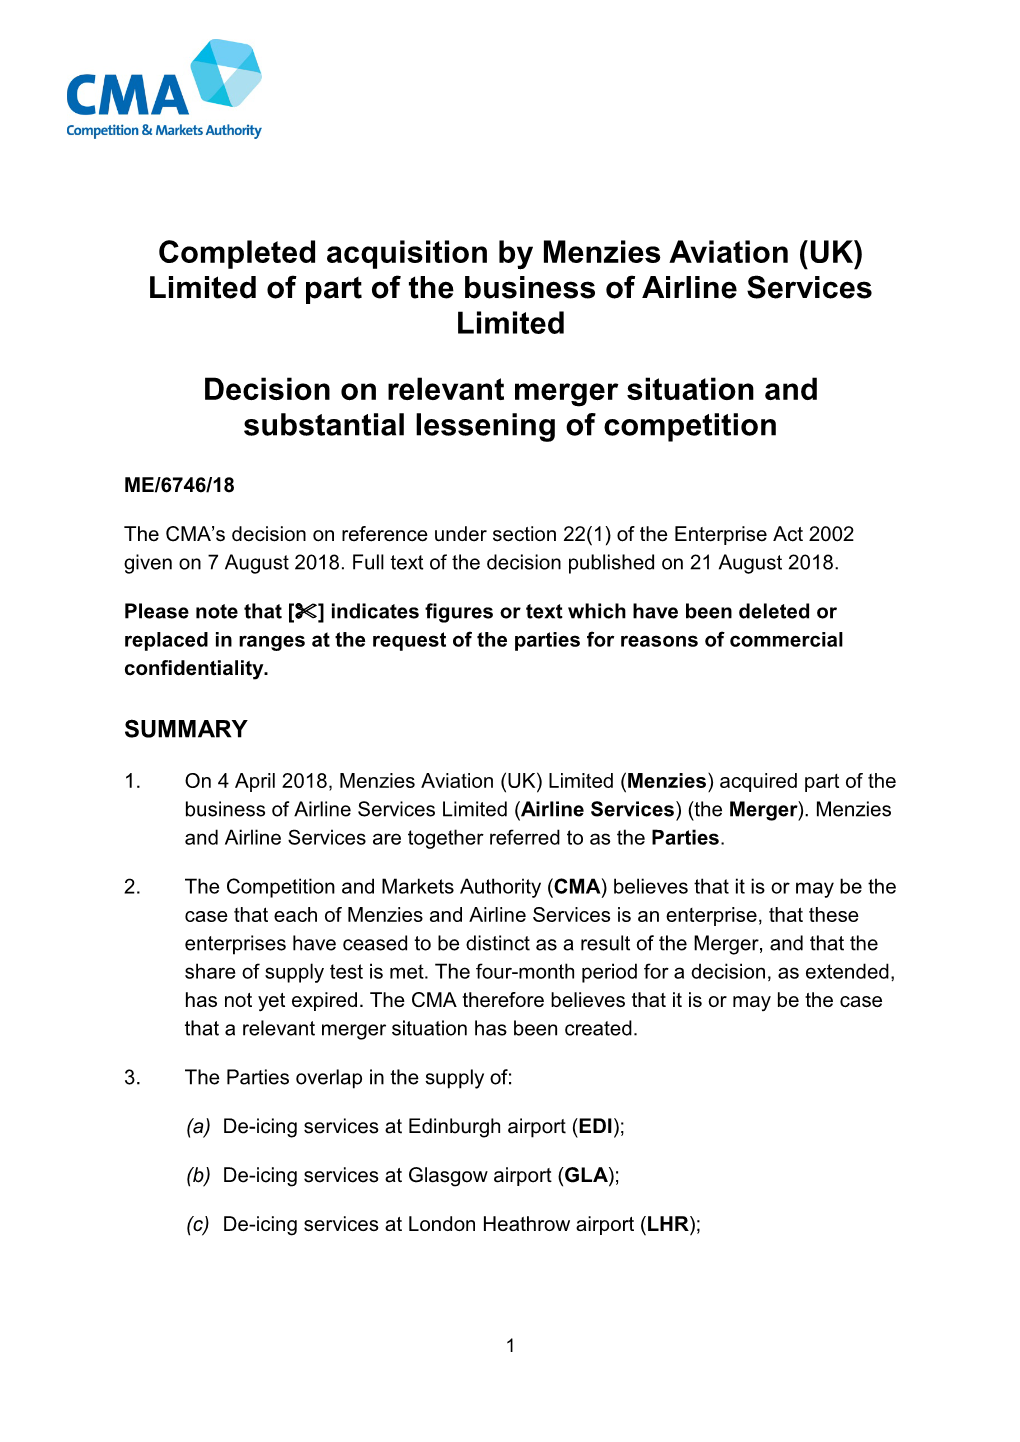 Completed Acquisition by Menzies Aviation (UK) Limited of Part of the Business of Airline Services Limited